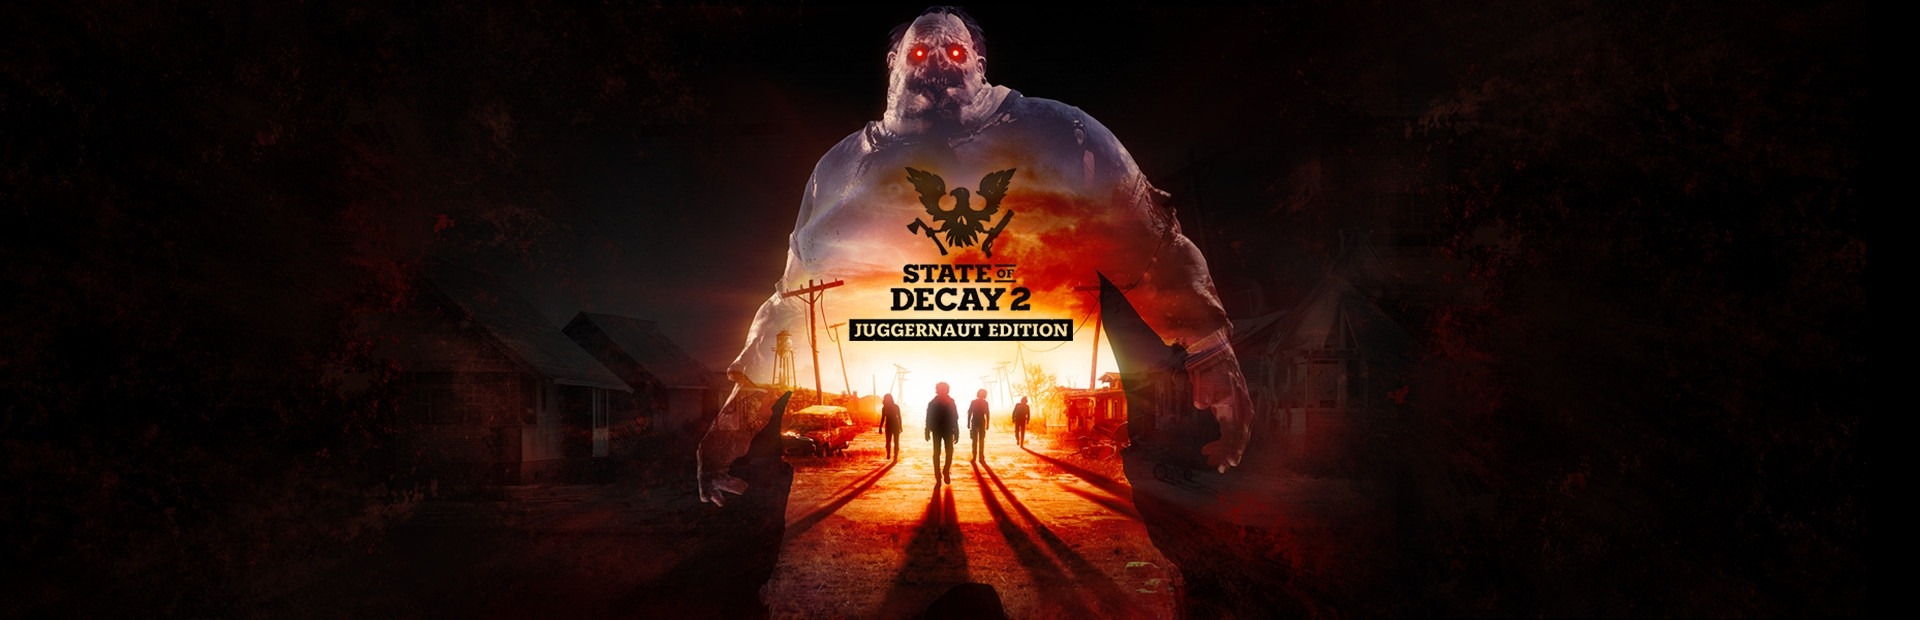 State of Decay 2: Juggernaut Edition (PC / Xbox ONE / Xbox Series X|S)